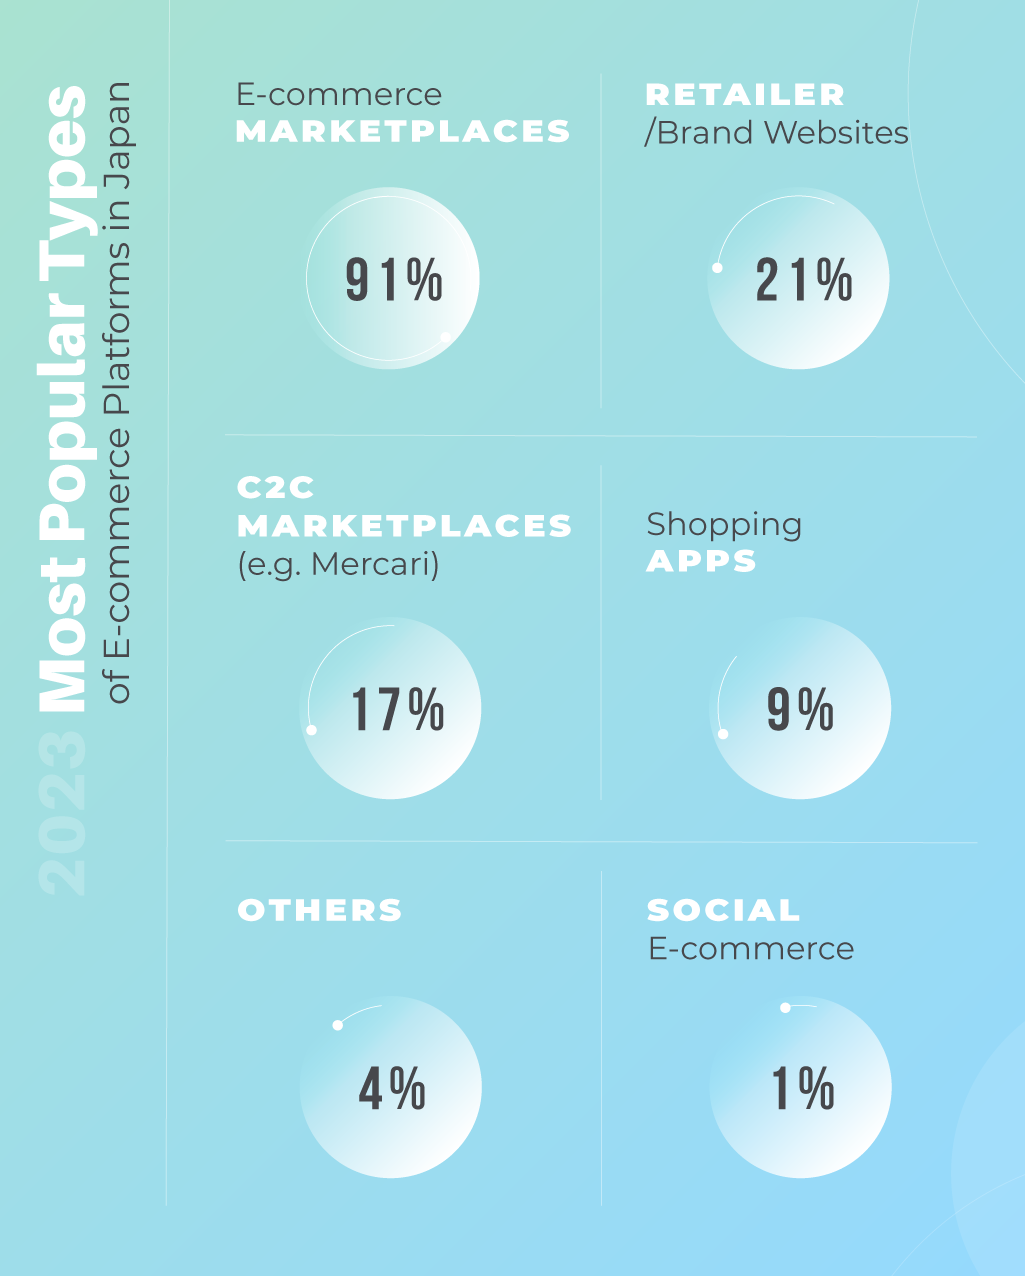 Infographic for leading platforms in e-commerce in Japan